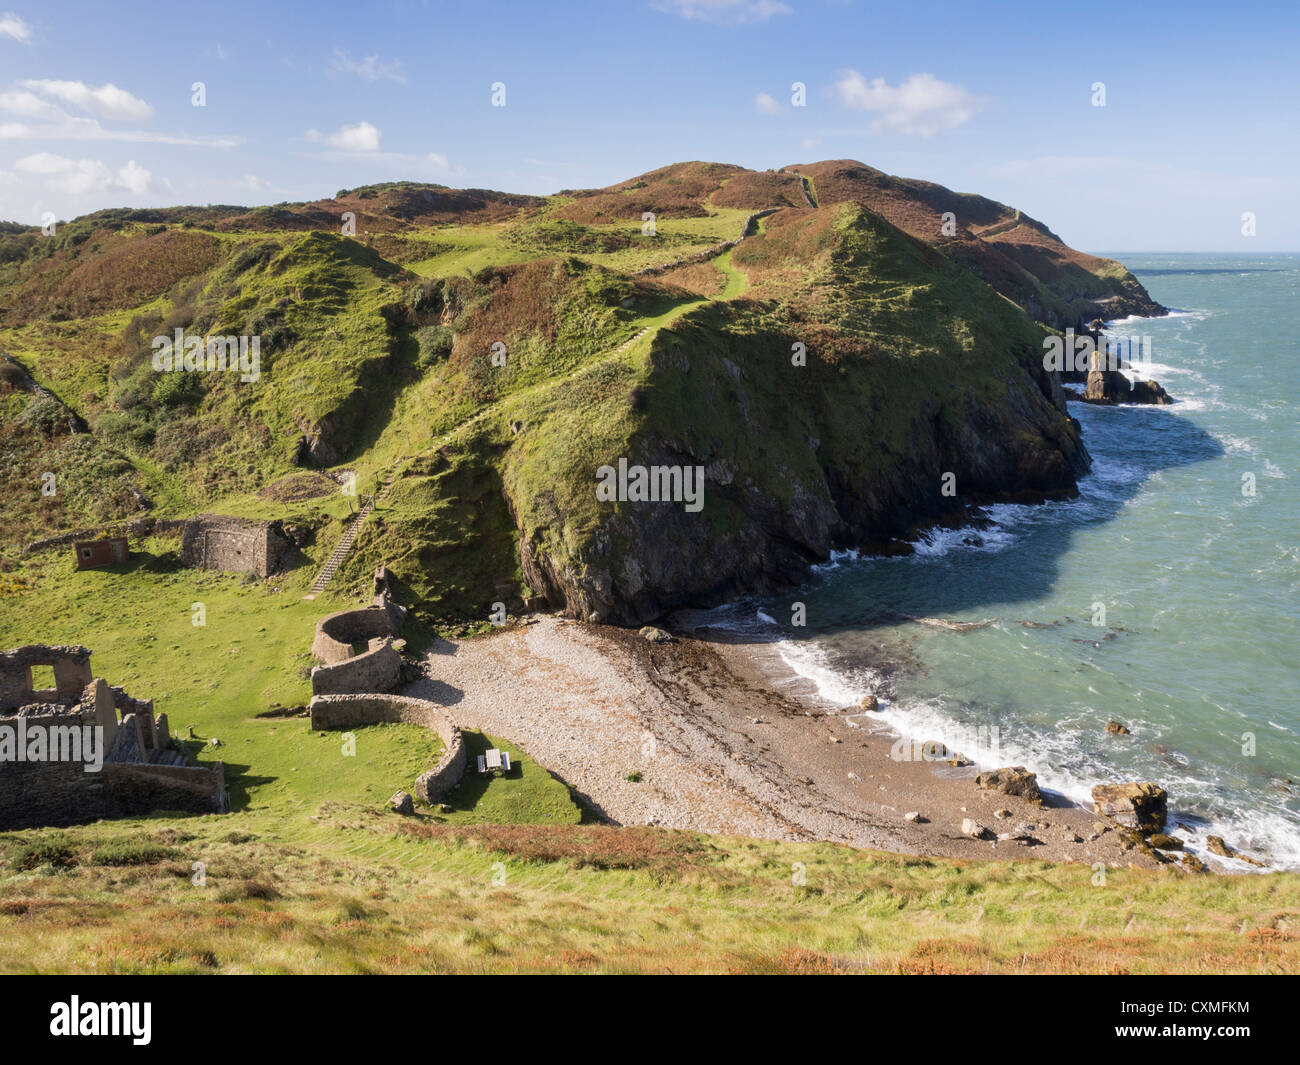 View of Isle of Anglesey Coastal Path Wales coast footpath and rugged coastline in AONB at Porth Llanlleiana Bay Cemaes Anglesey Wales UK Britain Stock Photo